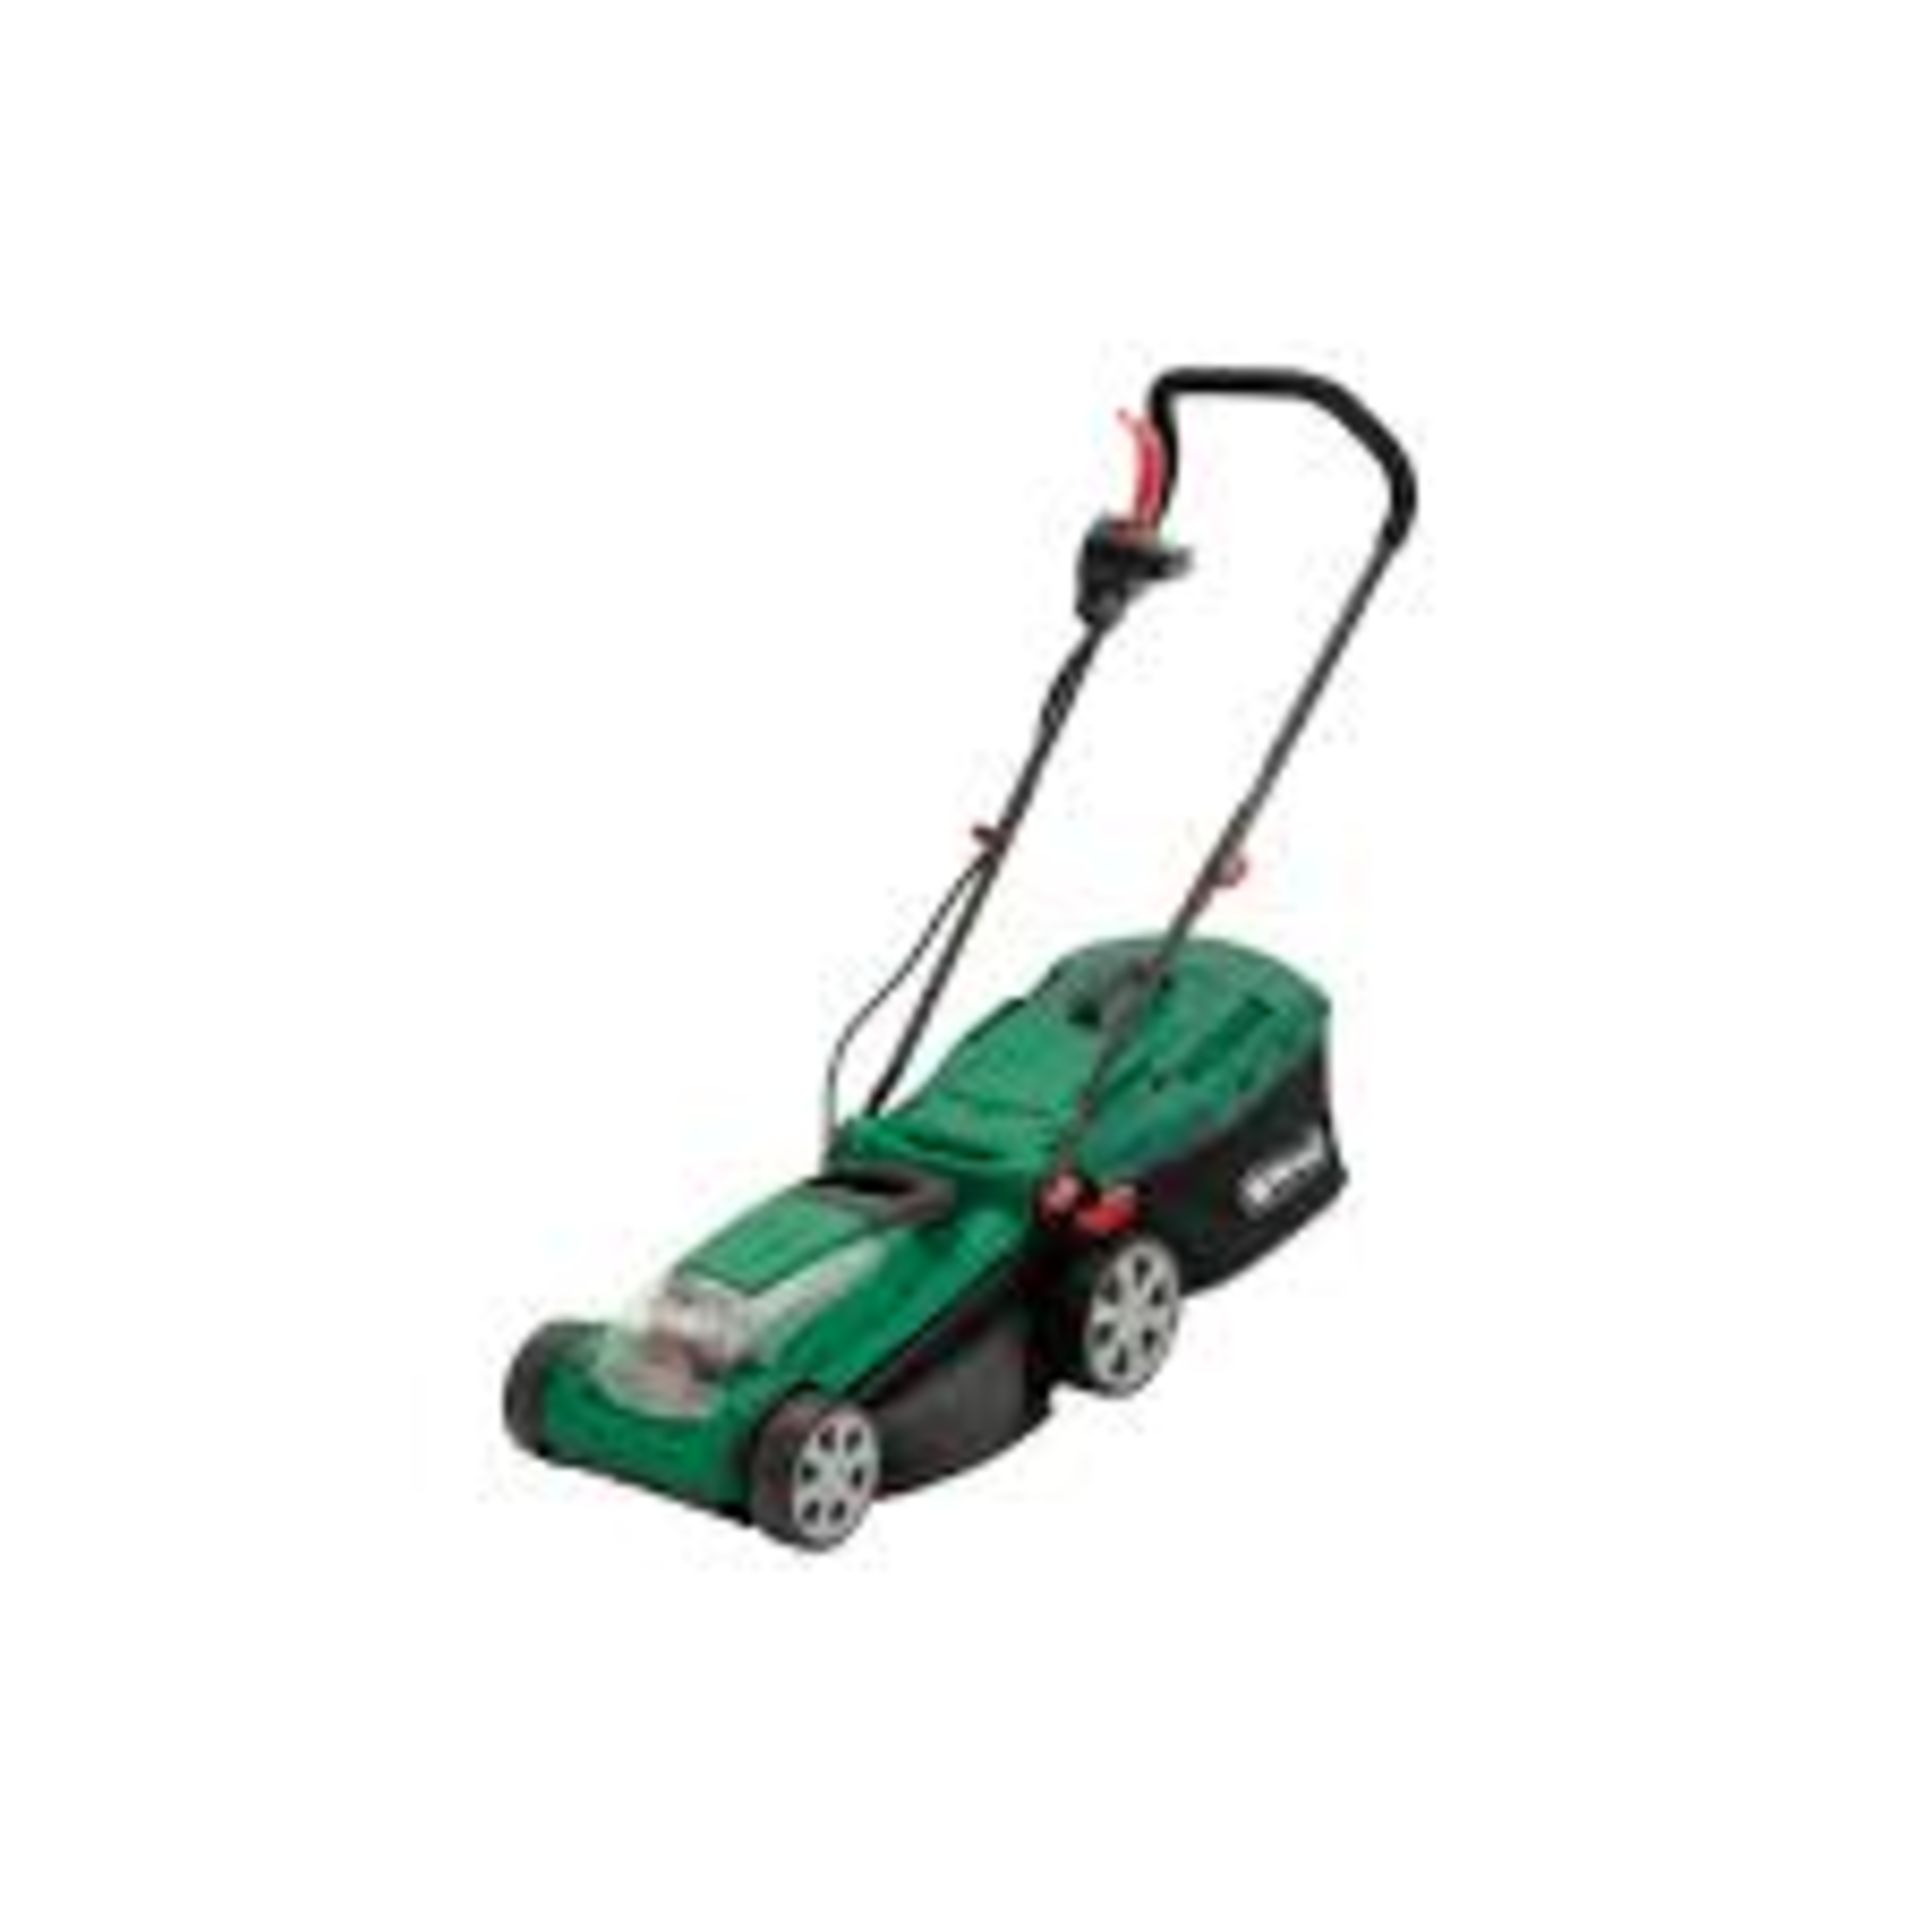 (R14G) 3x Items. 1x Qualcast 39cm 36V Cordless Rotary Lawn Mower (With Battery & Charger). 1x Qualc